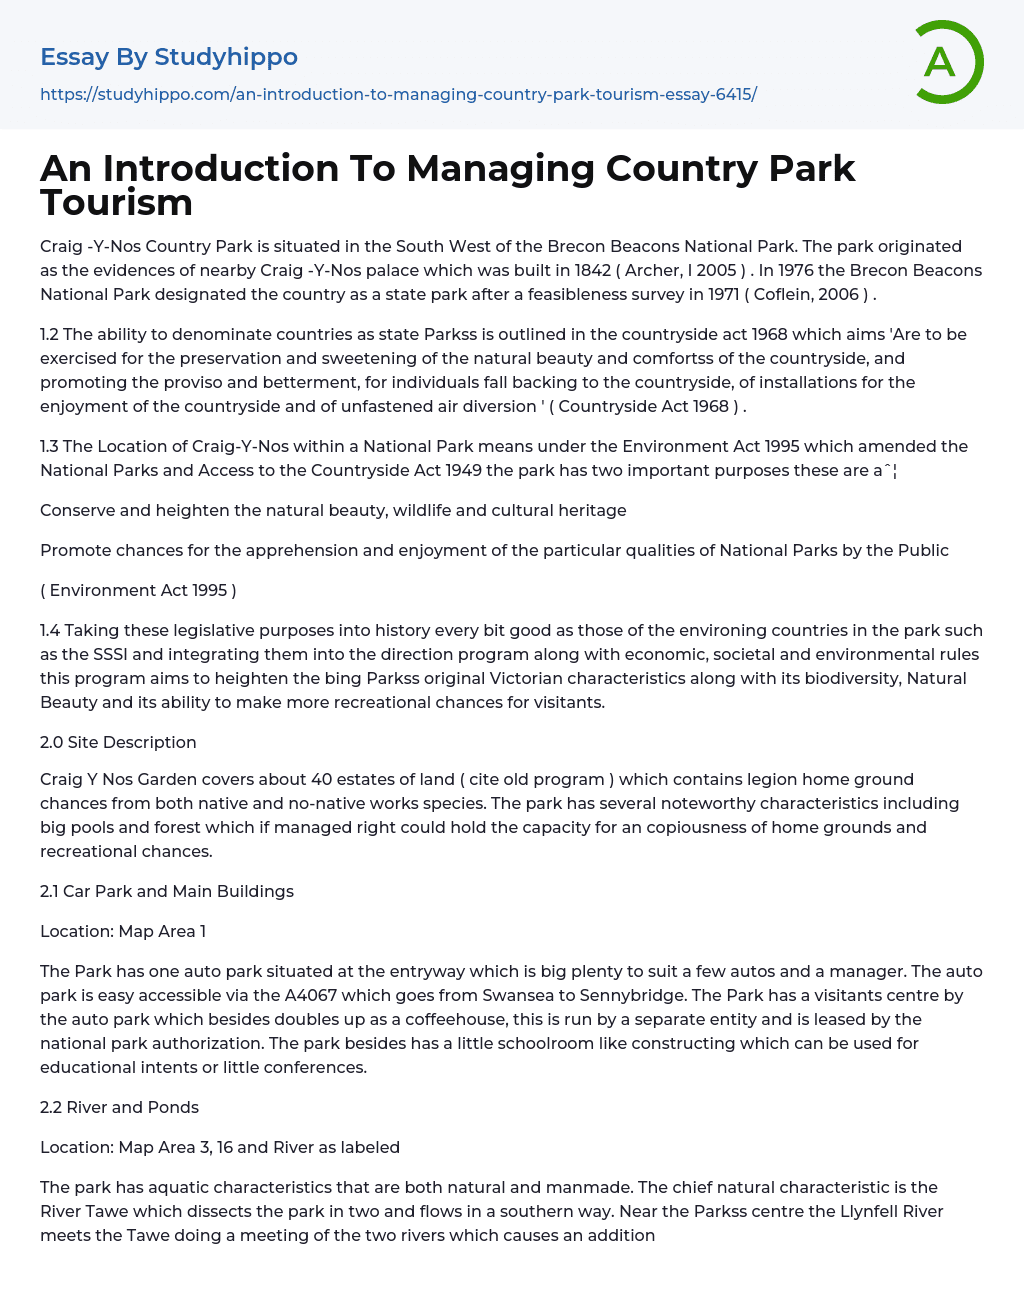 An Introduction To Managing Country Park Tourism